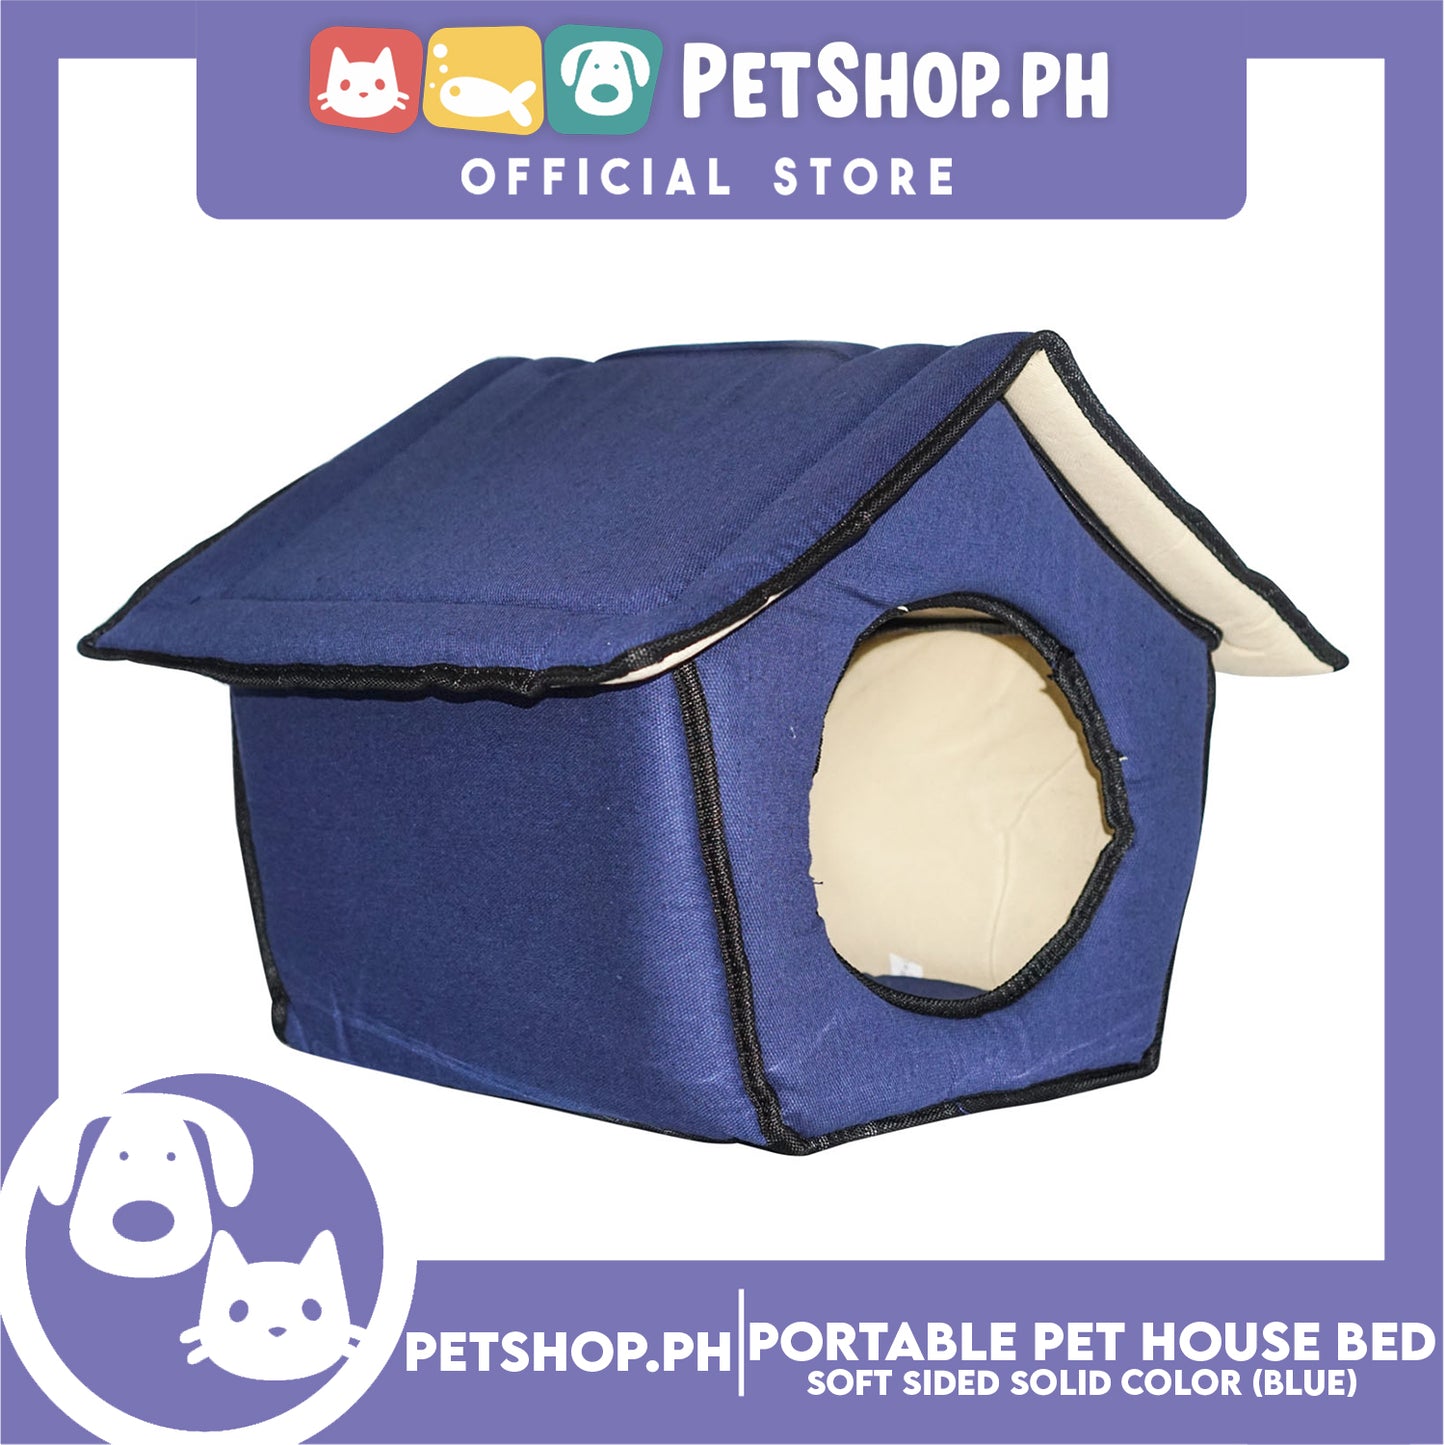 Portable Pet House Bed With Soft Sided Solid Color 25x31x32cm Small (Blue)